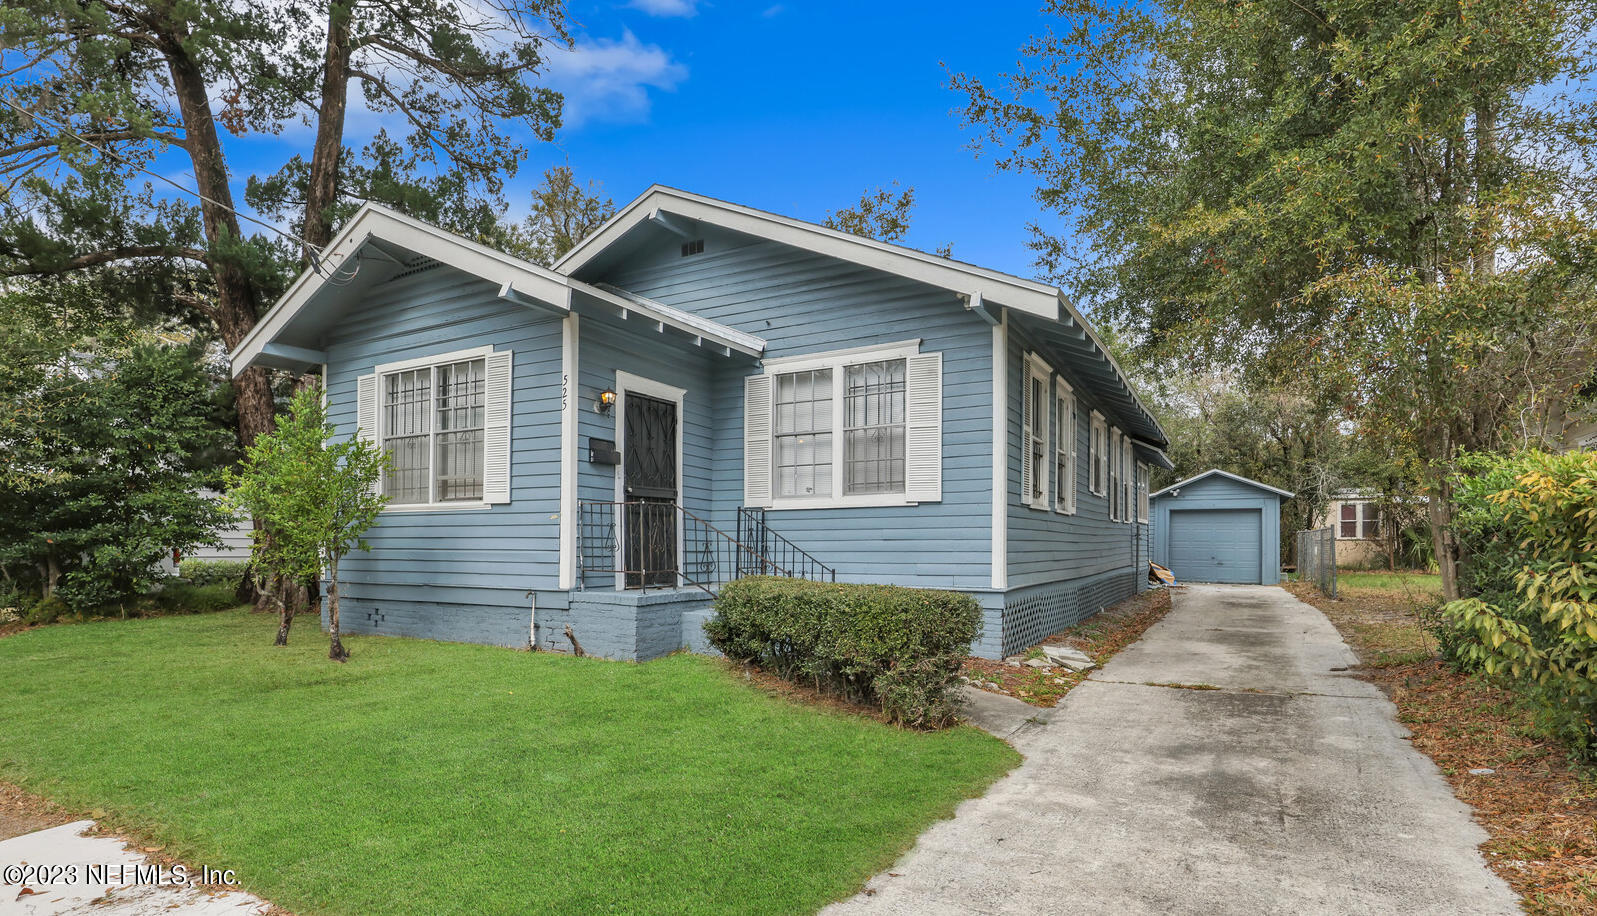 Jacksonville, FL home for sale located at 525 W 18th Street, Jacksonville, FL 32206